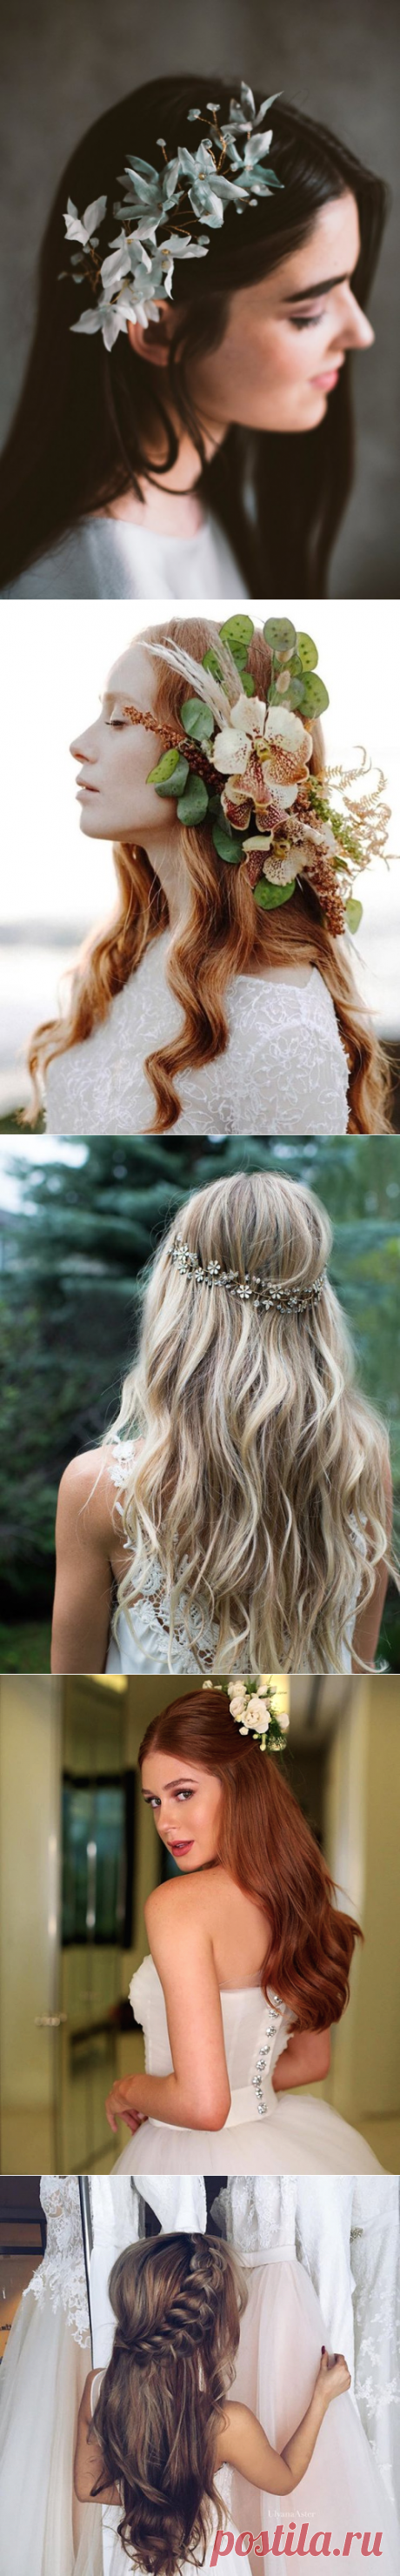 39 Fab Bridal Hair Style Ideas For Every Lenght! - Wedding Vibes!